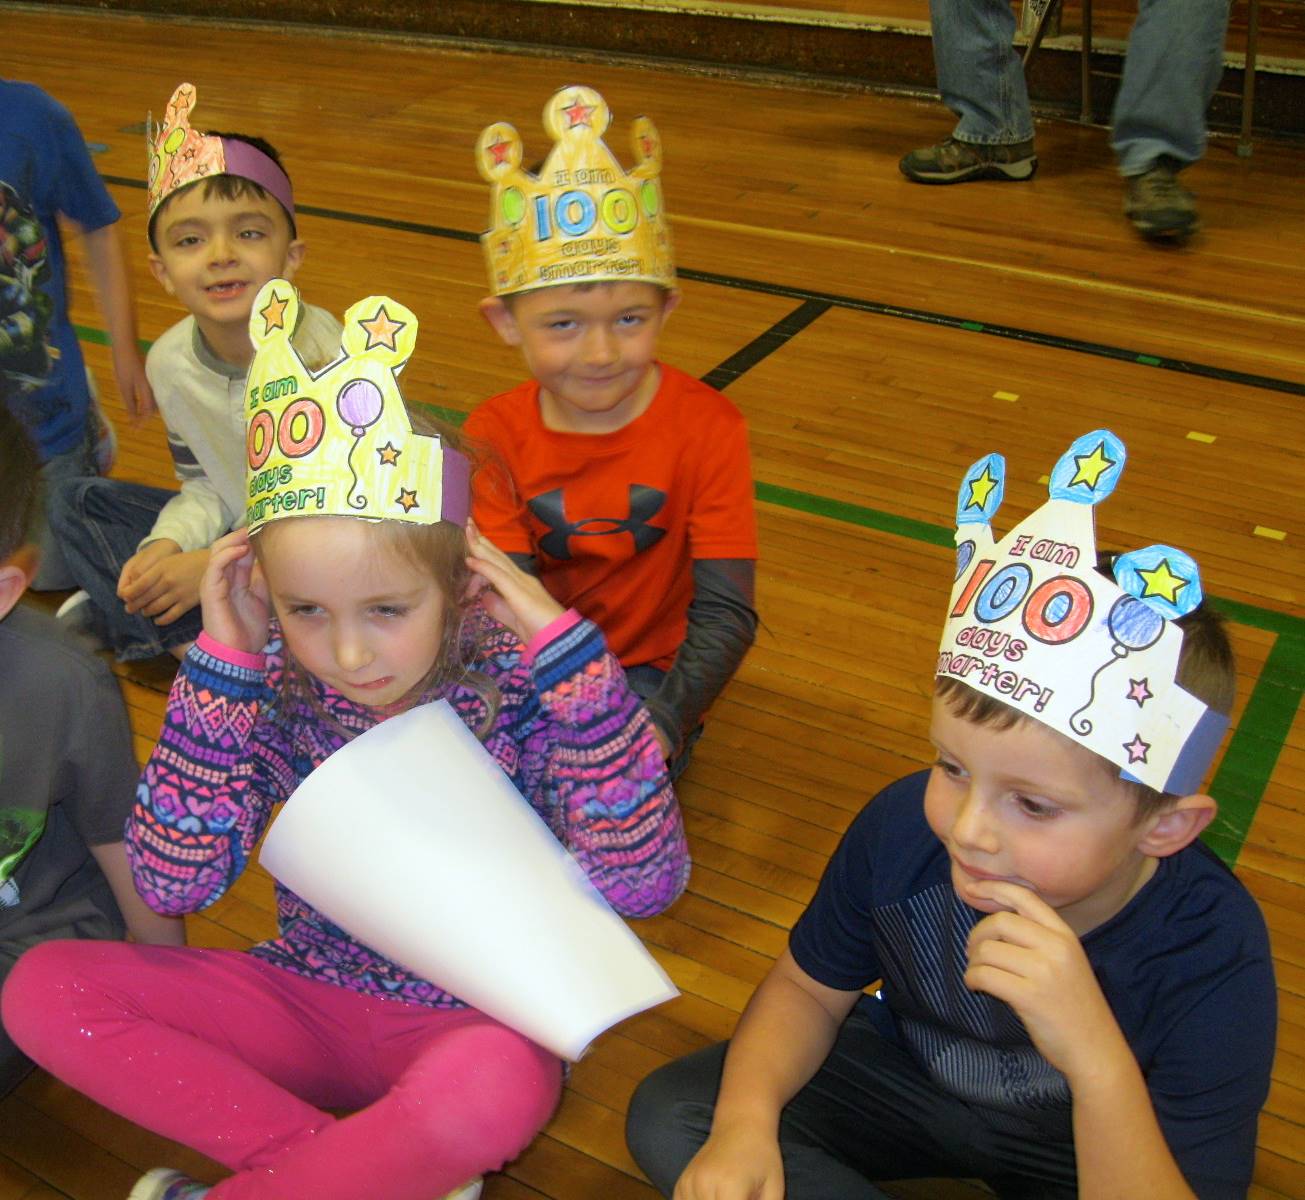 Students wearing, "100 days of being smarter" hats.